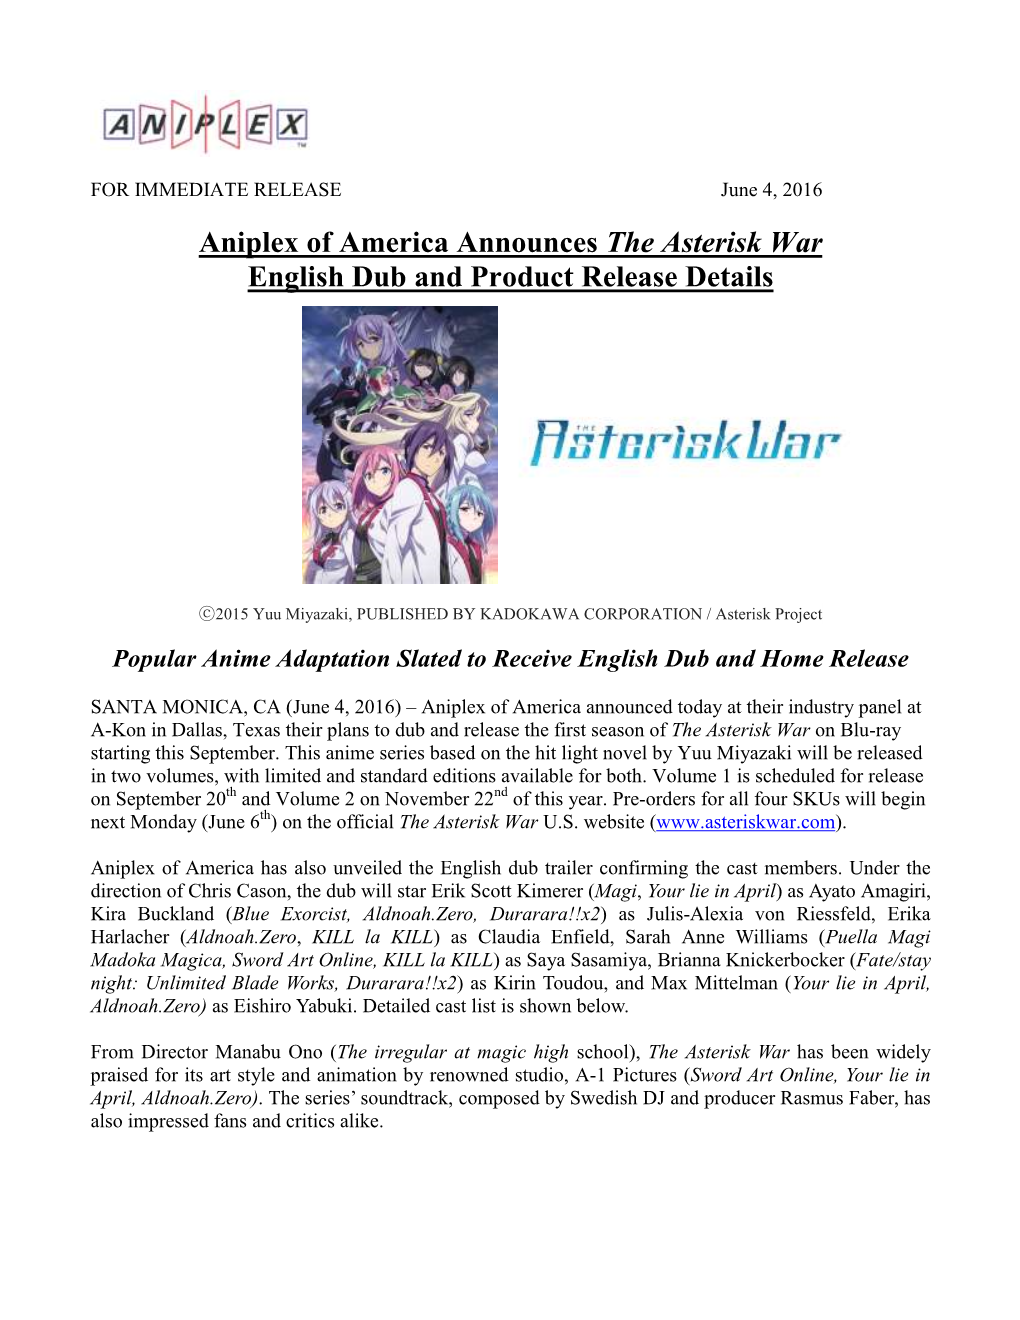 Aniplex of America Announces the Asterisk War English Dub and Product Release Details